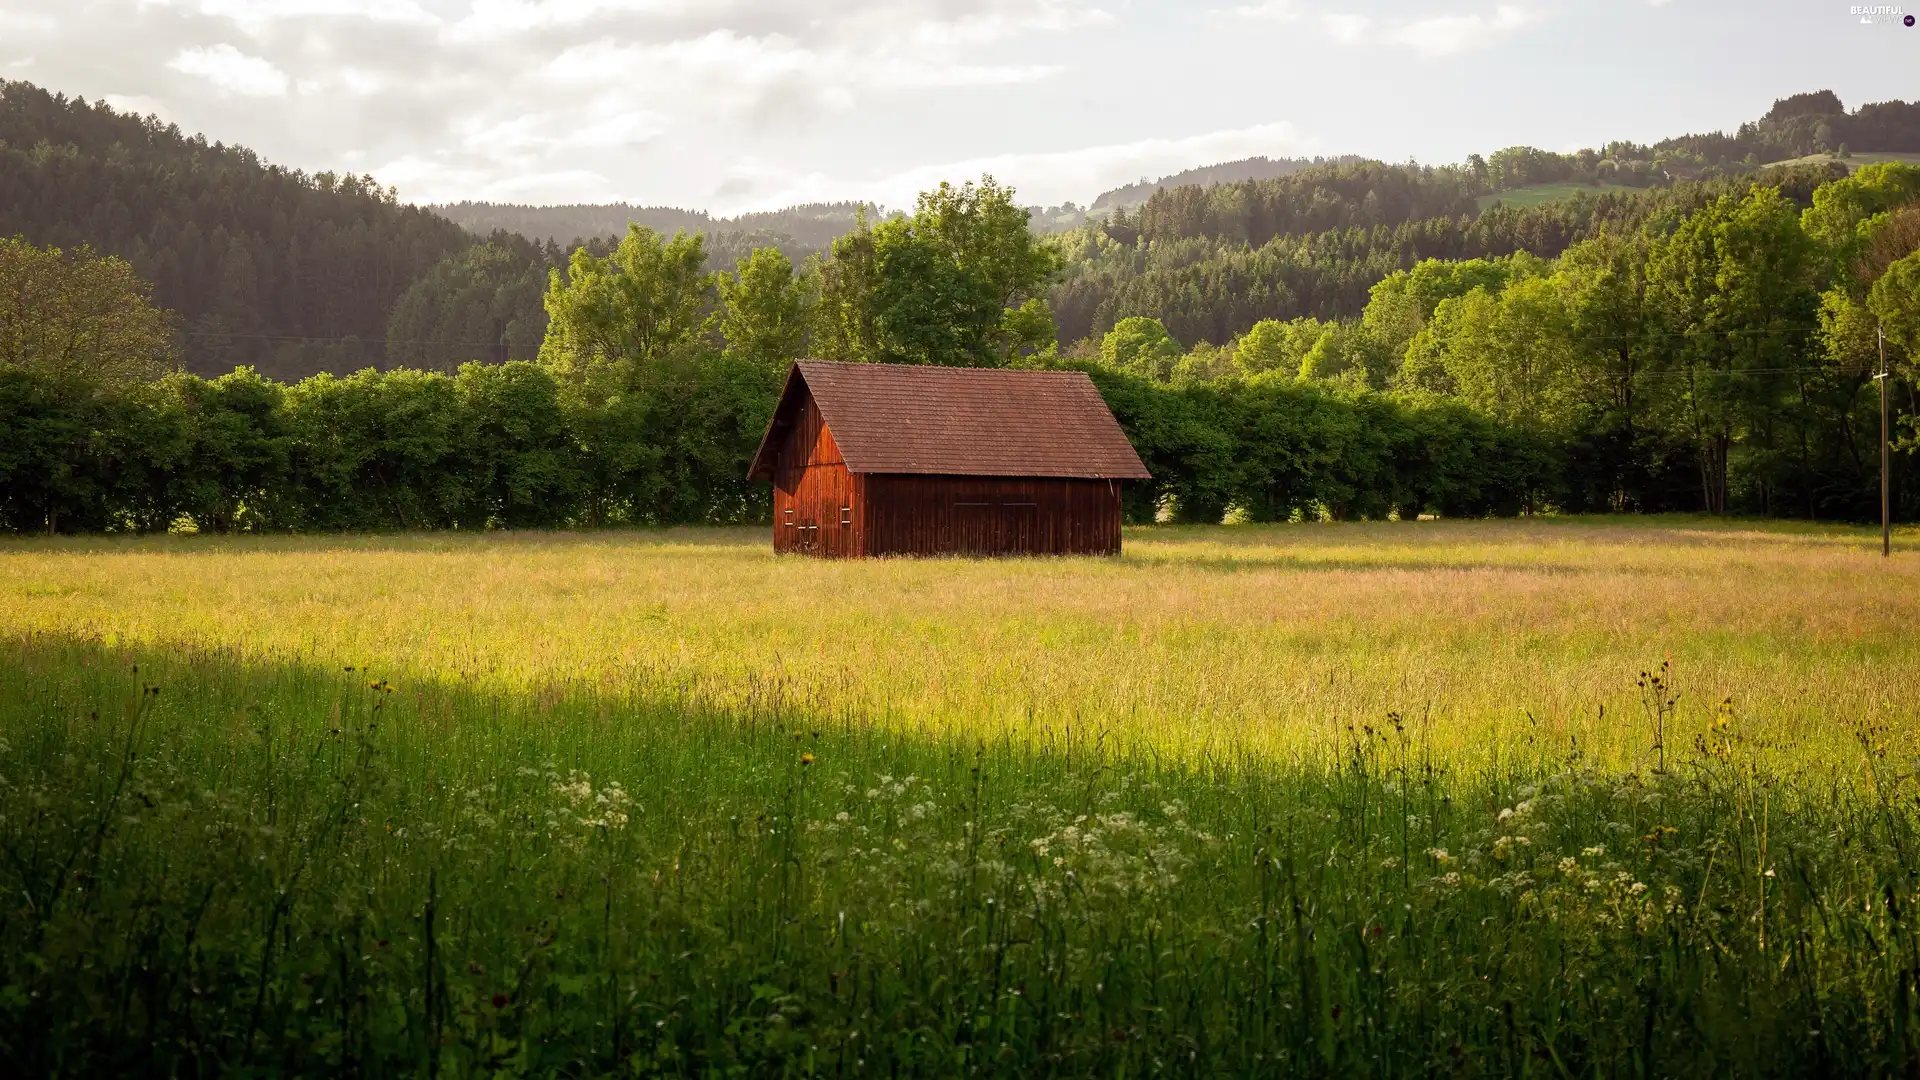 Meadow, Flowers, Mountains, woods, viewes, cote, house, trees